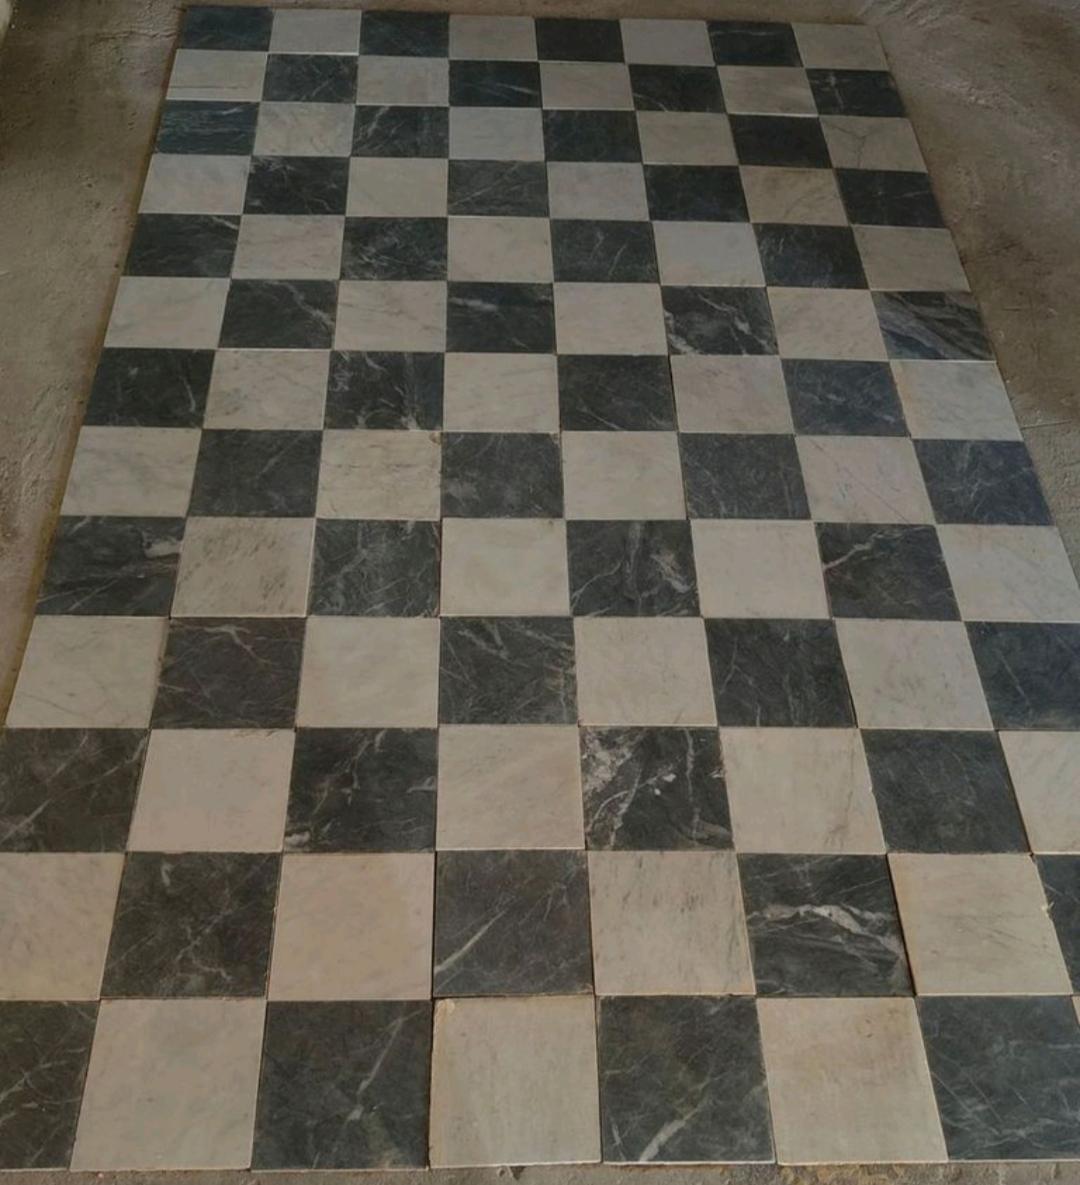 1920s Reclaimed Italian Carrara Bianco and Nero Marble Checker Flooring Tile - 1076 Sqft.

Piece by piece reclaimed Italian classical Carrara marble checkered tile. This early 20th century antique flooring set speaks for itself. It remains